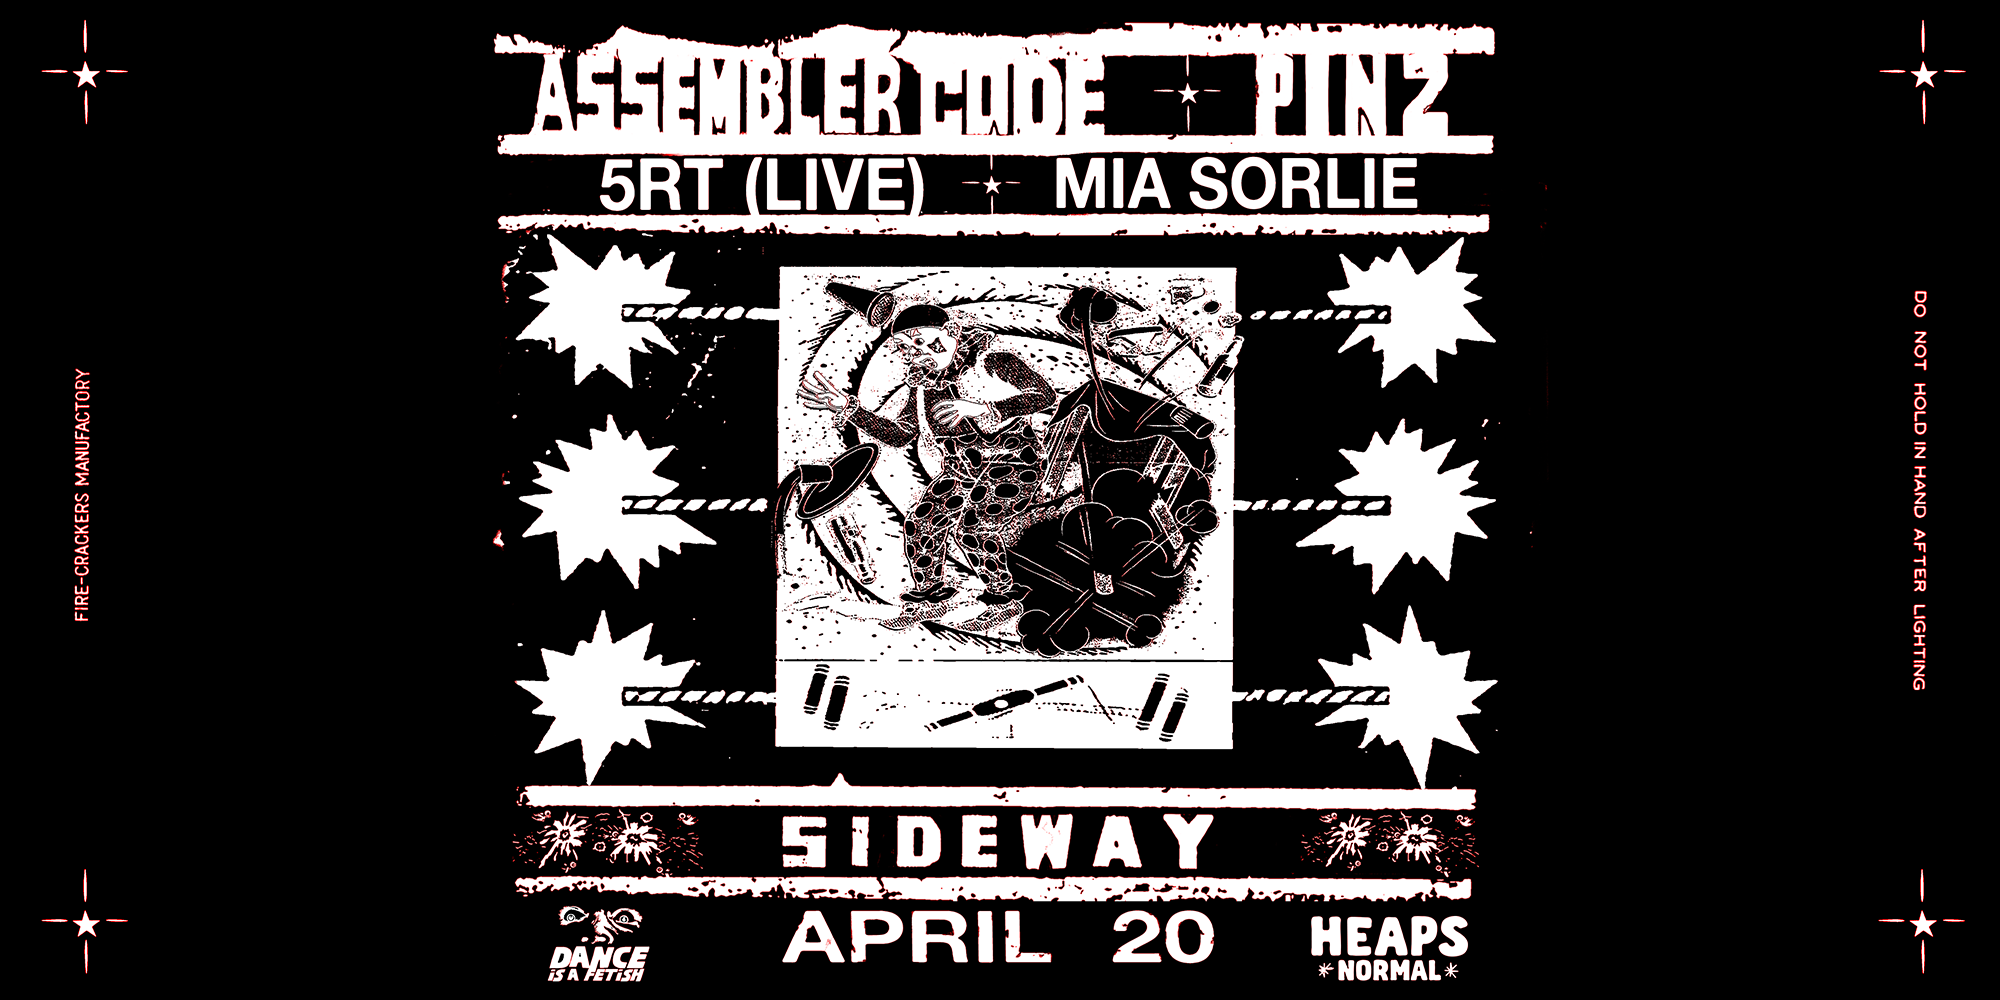 Assembler Code X Pinz - with 5RT + Mia Sorlie - presented by Heaps Normal - フライヤー表